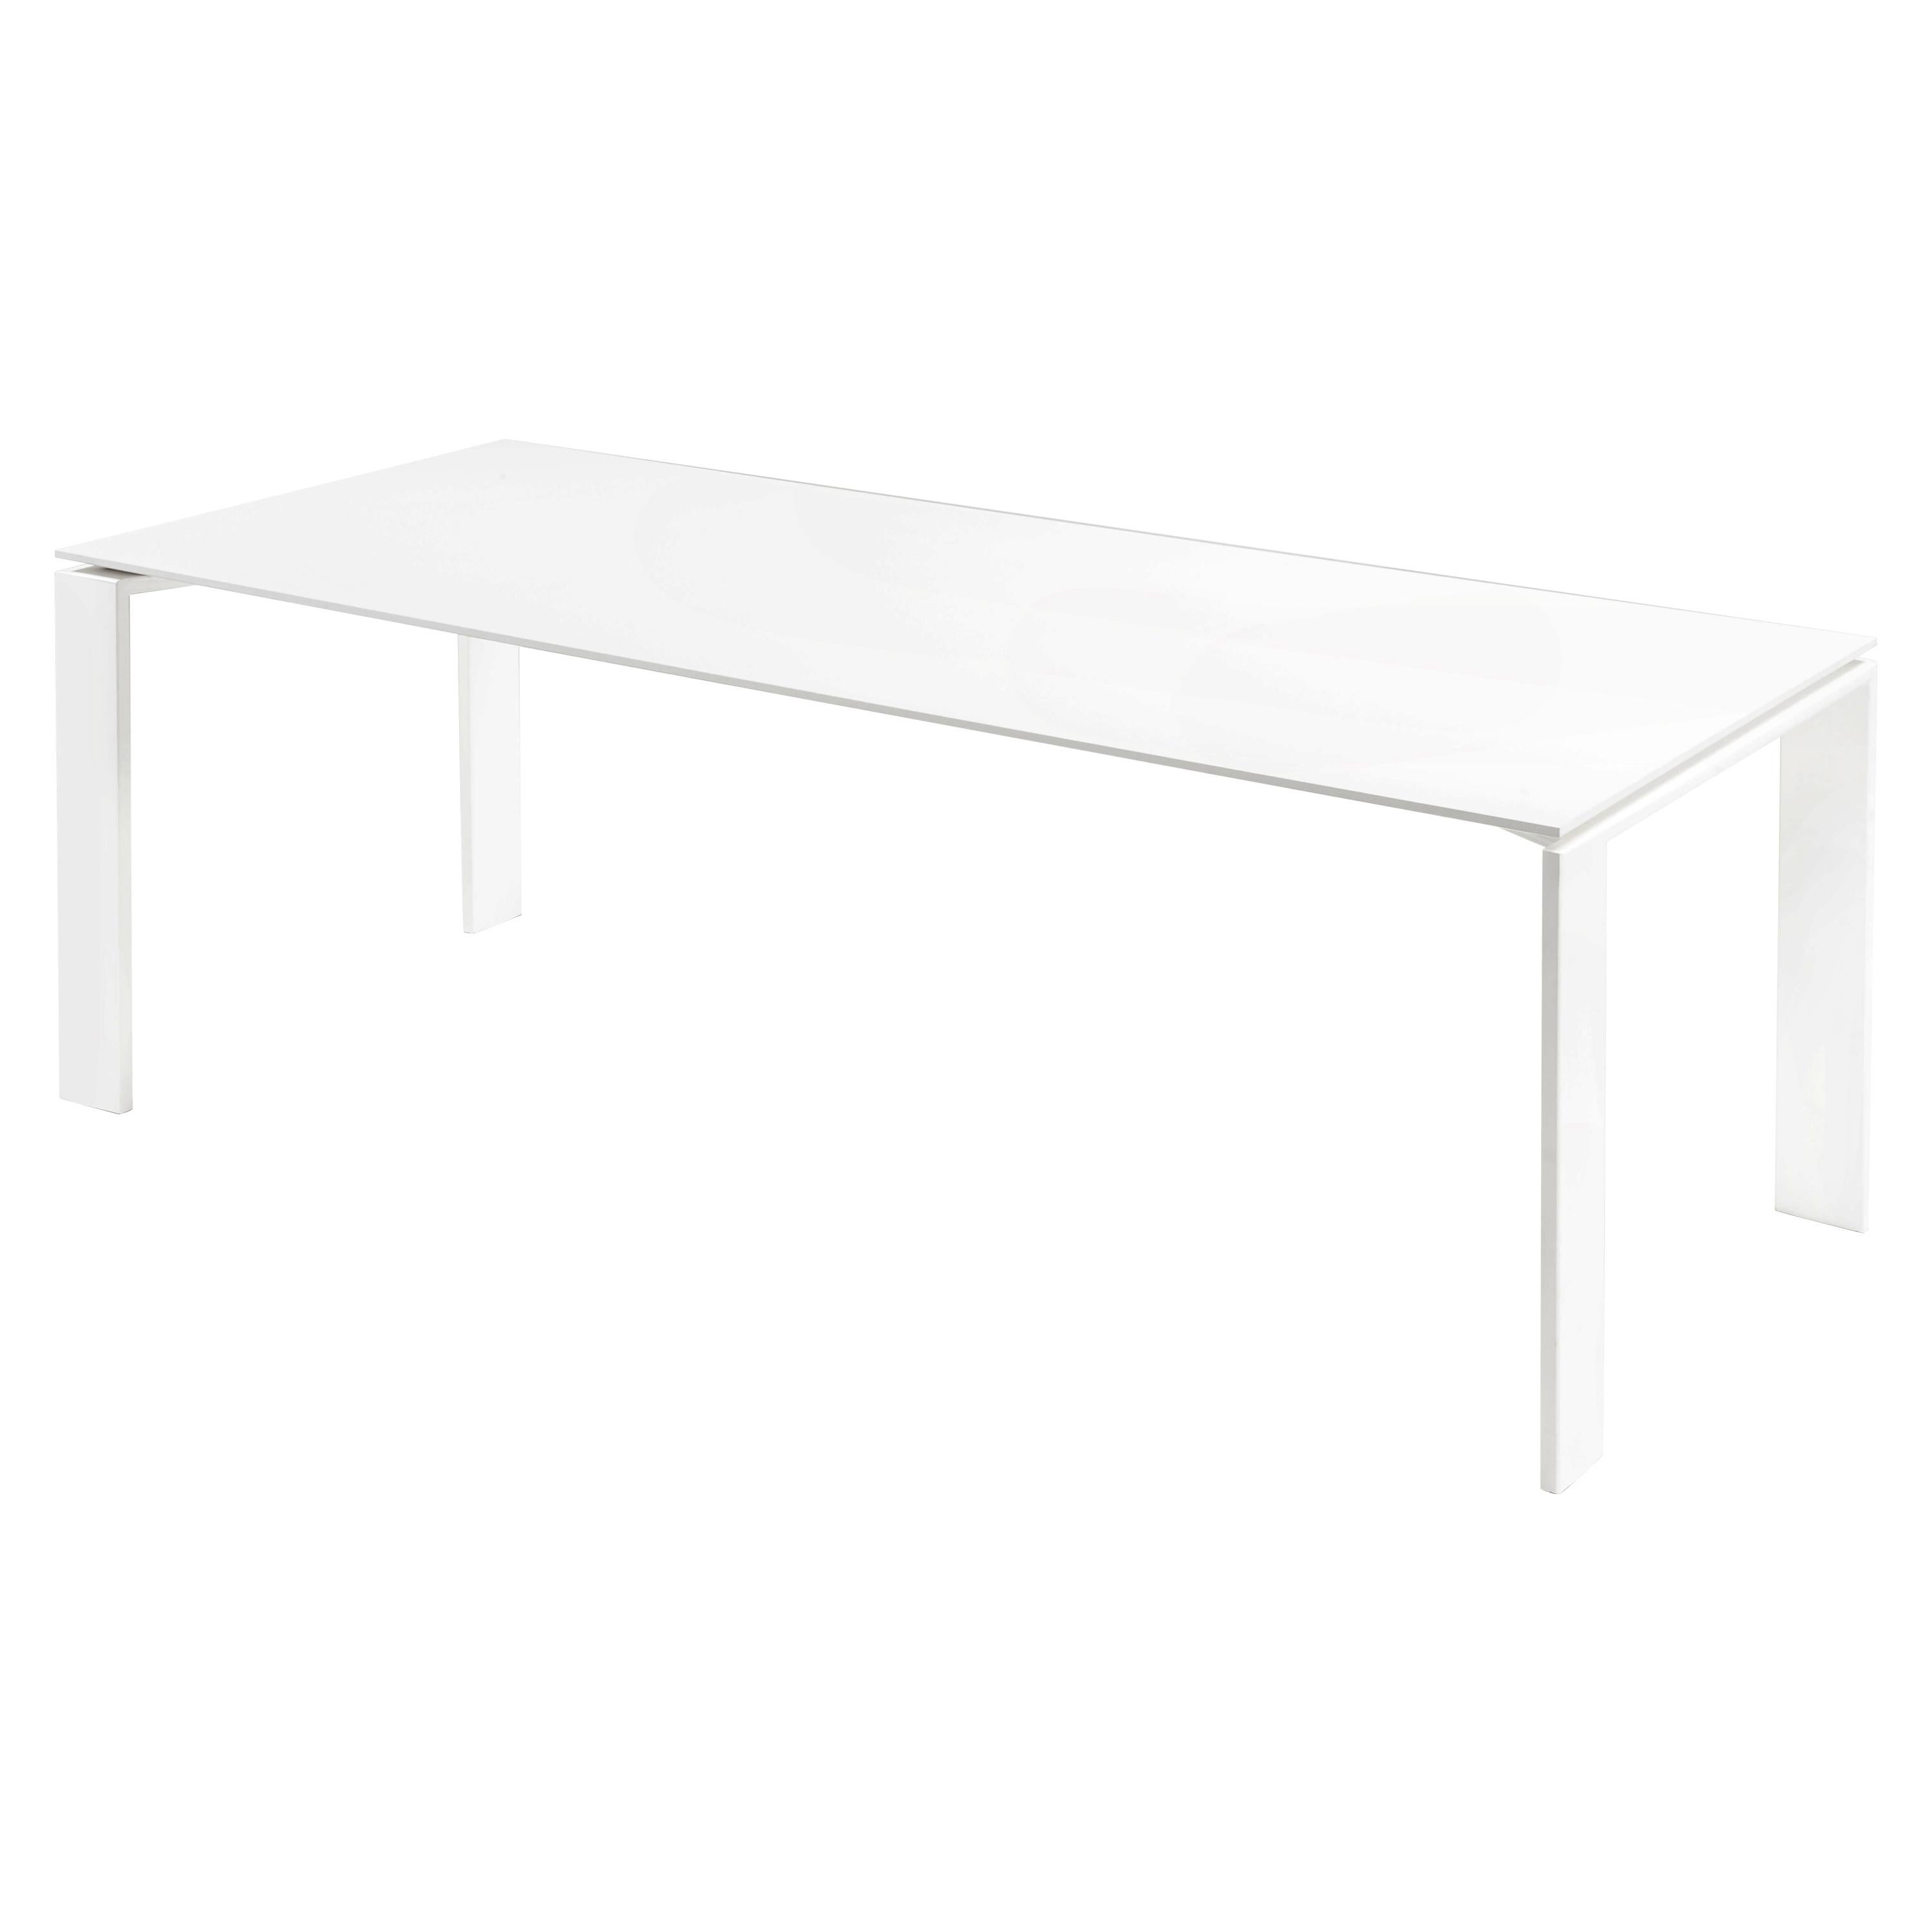 Kartell Outdoor Four Table in White by Ferruccio Laviani For Sale